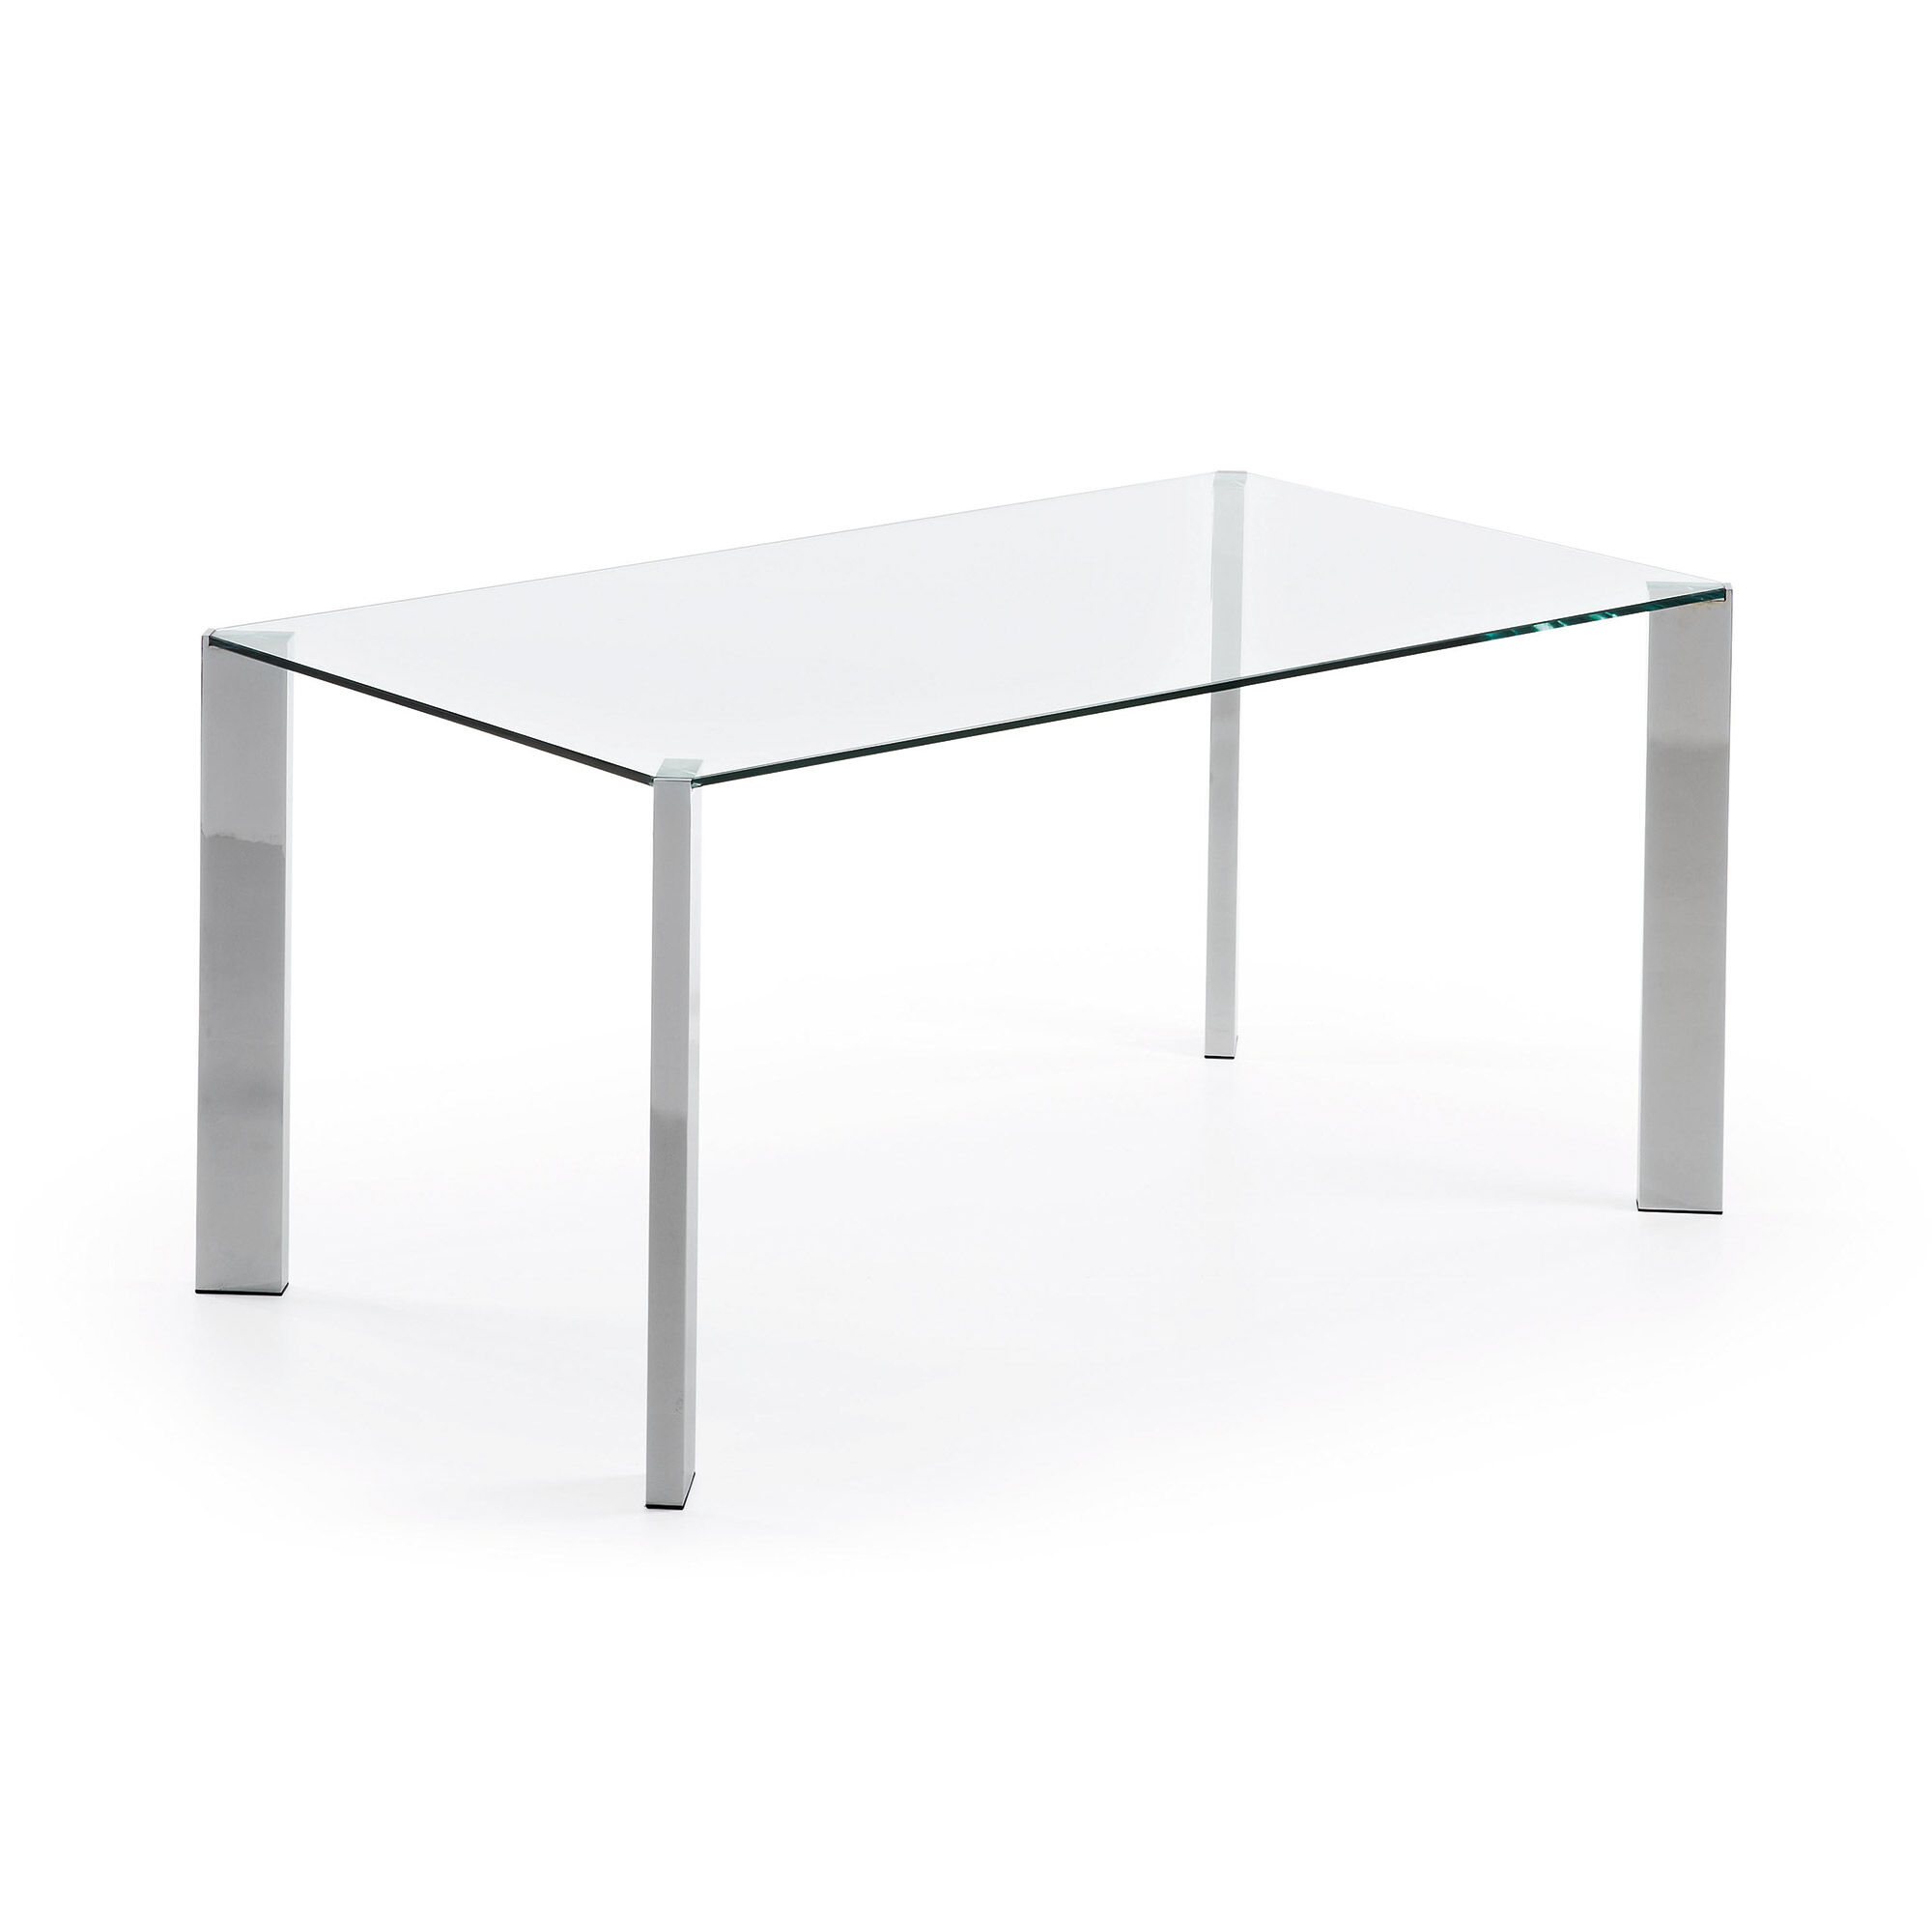 Kave Home Spot glass table with steel legs and chrome finish 162 x 92 cm